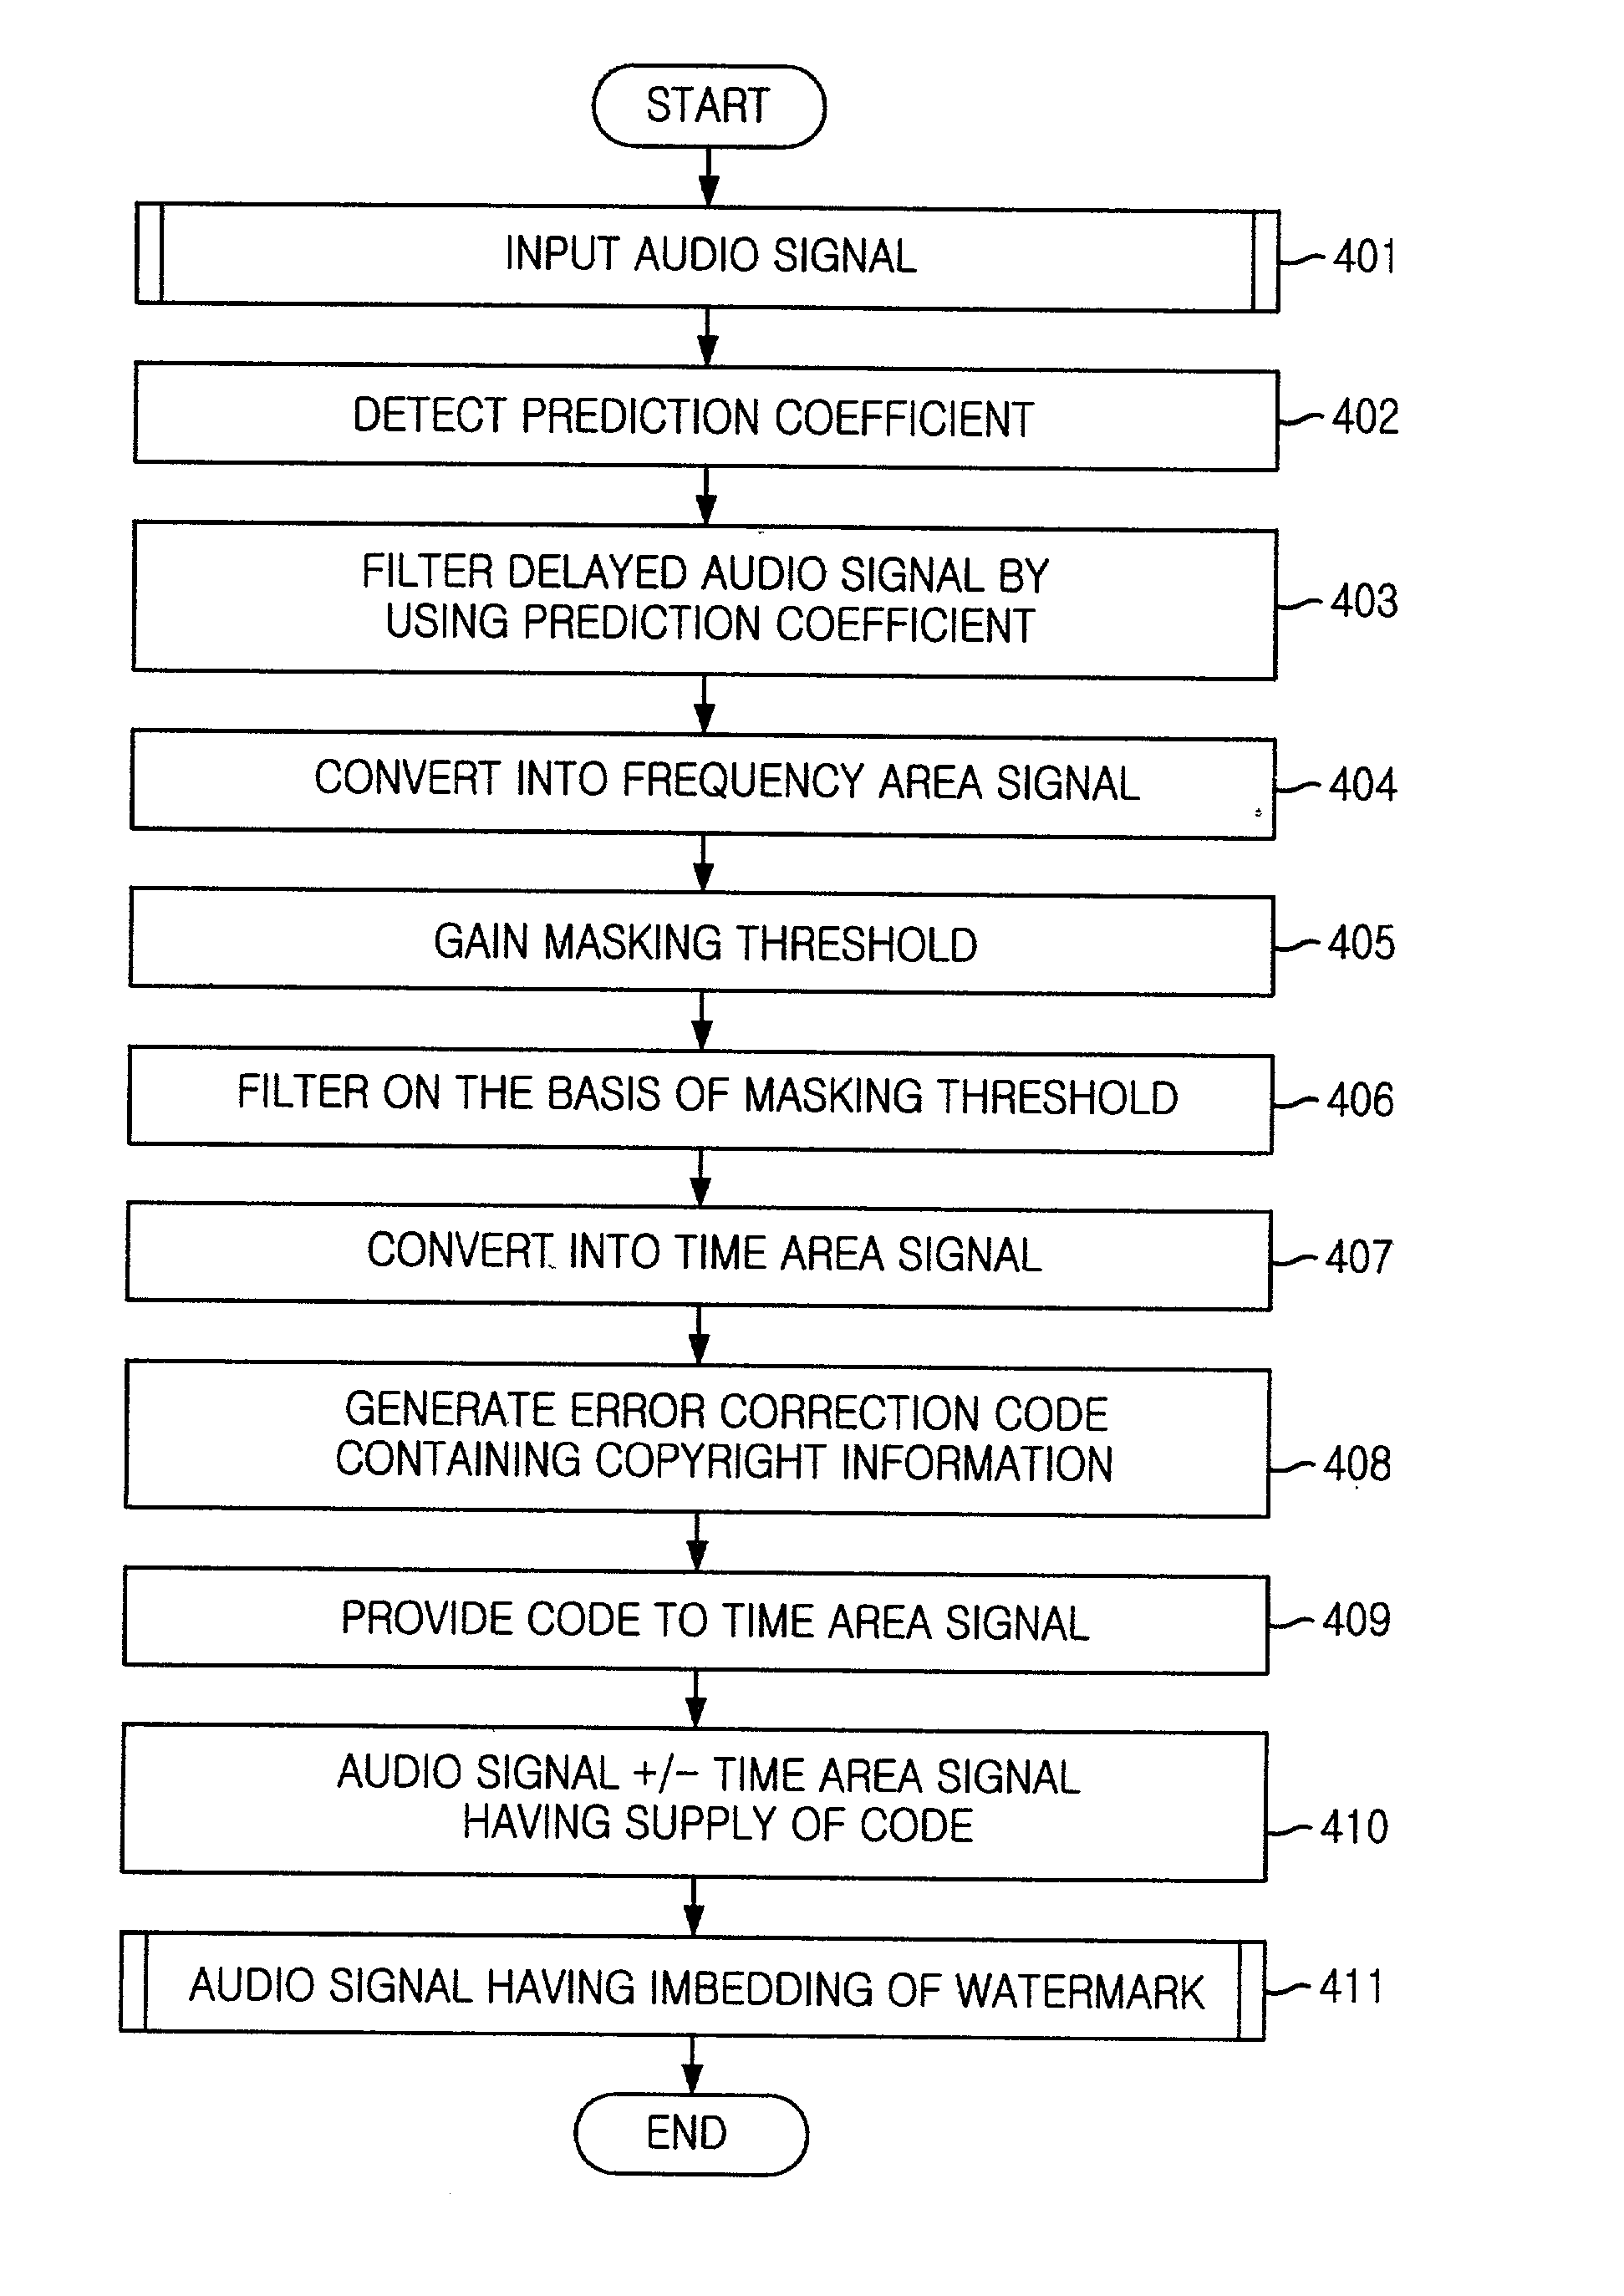 Apparatus and method for watermark embedding and detection using linear prediction analysis